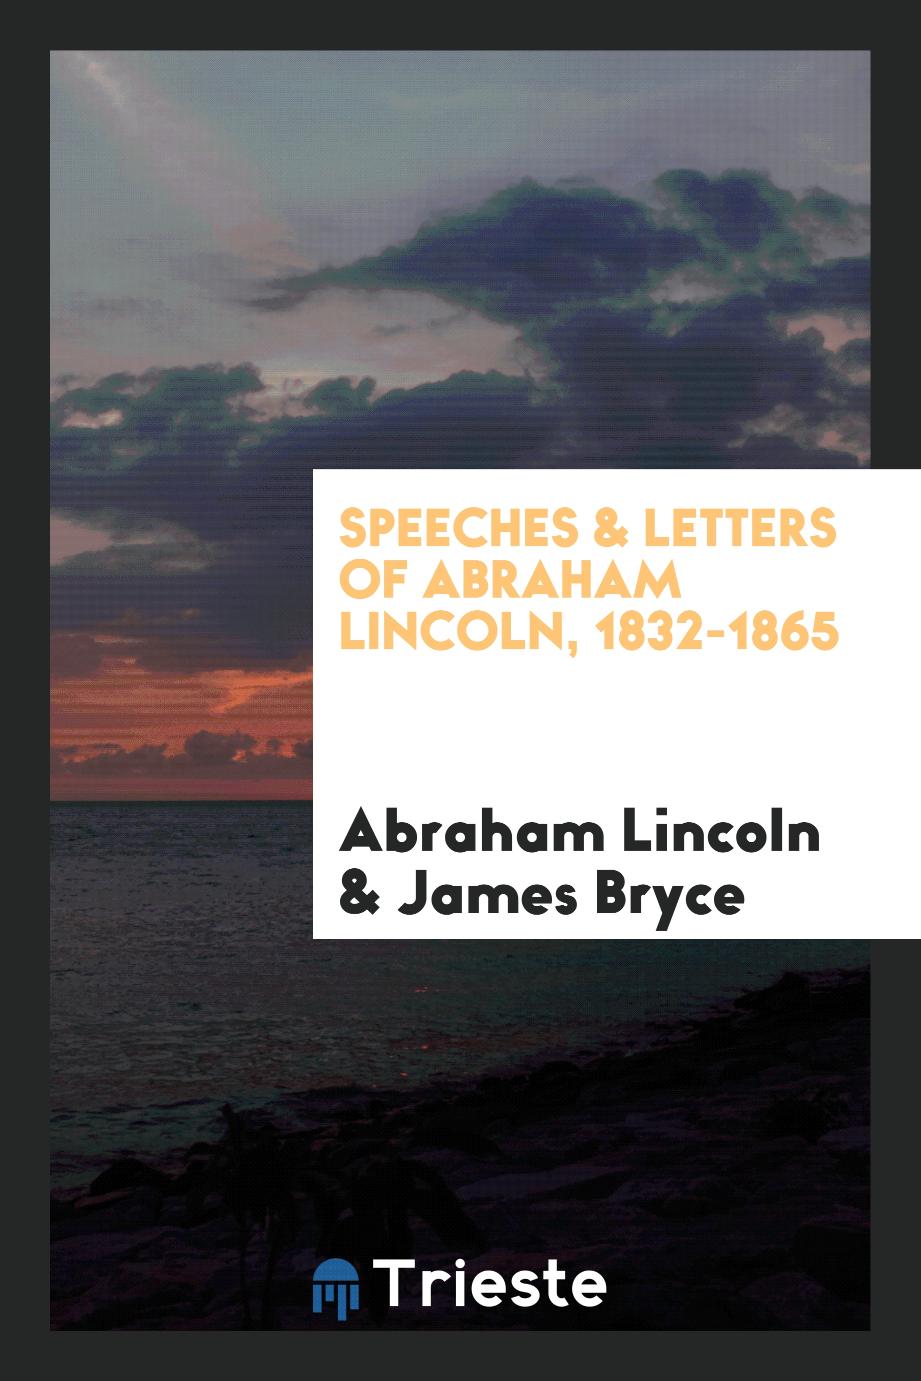 Speeches & letters of Abraham Lincoln, 1832-1865